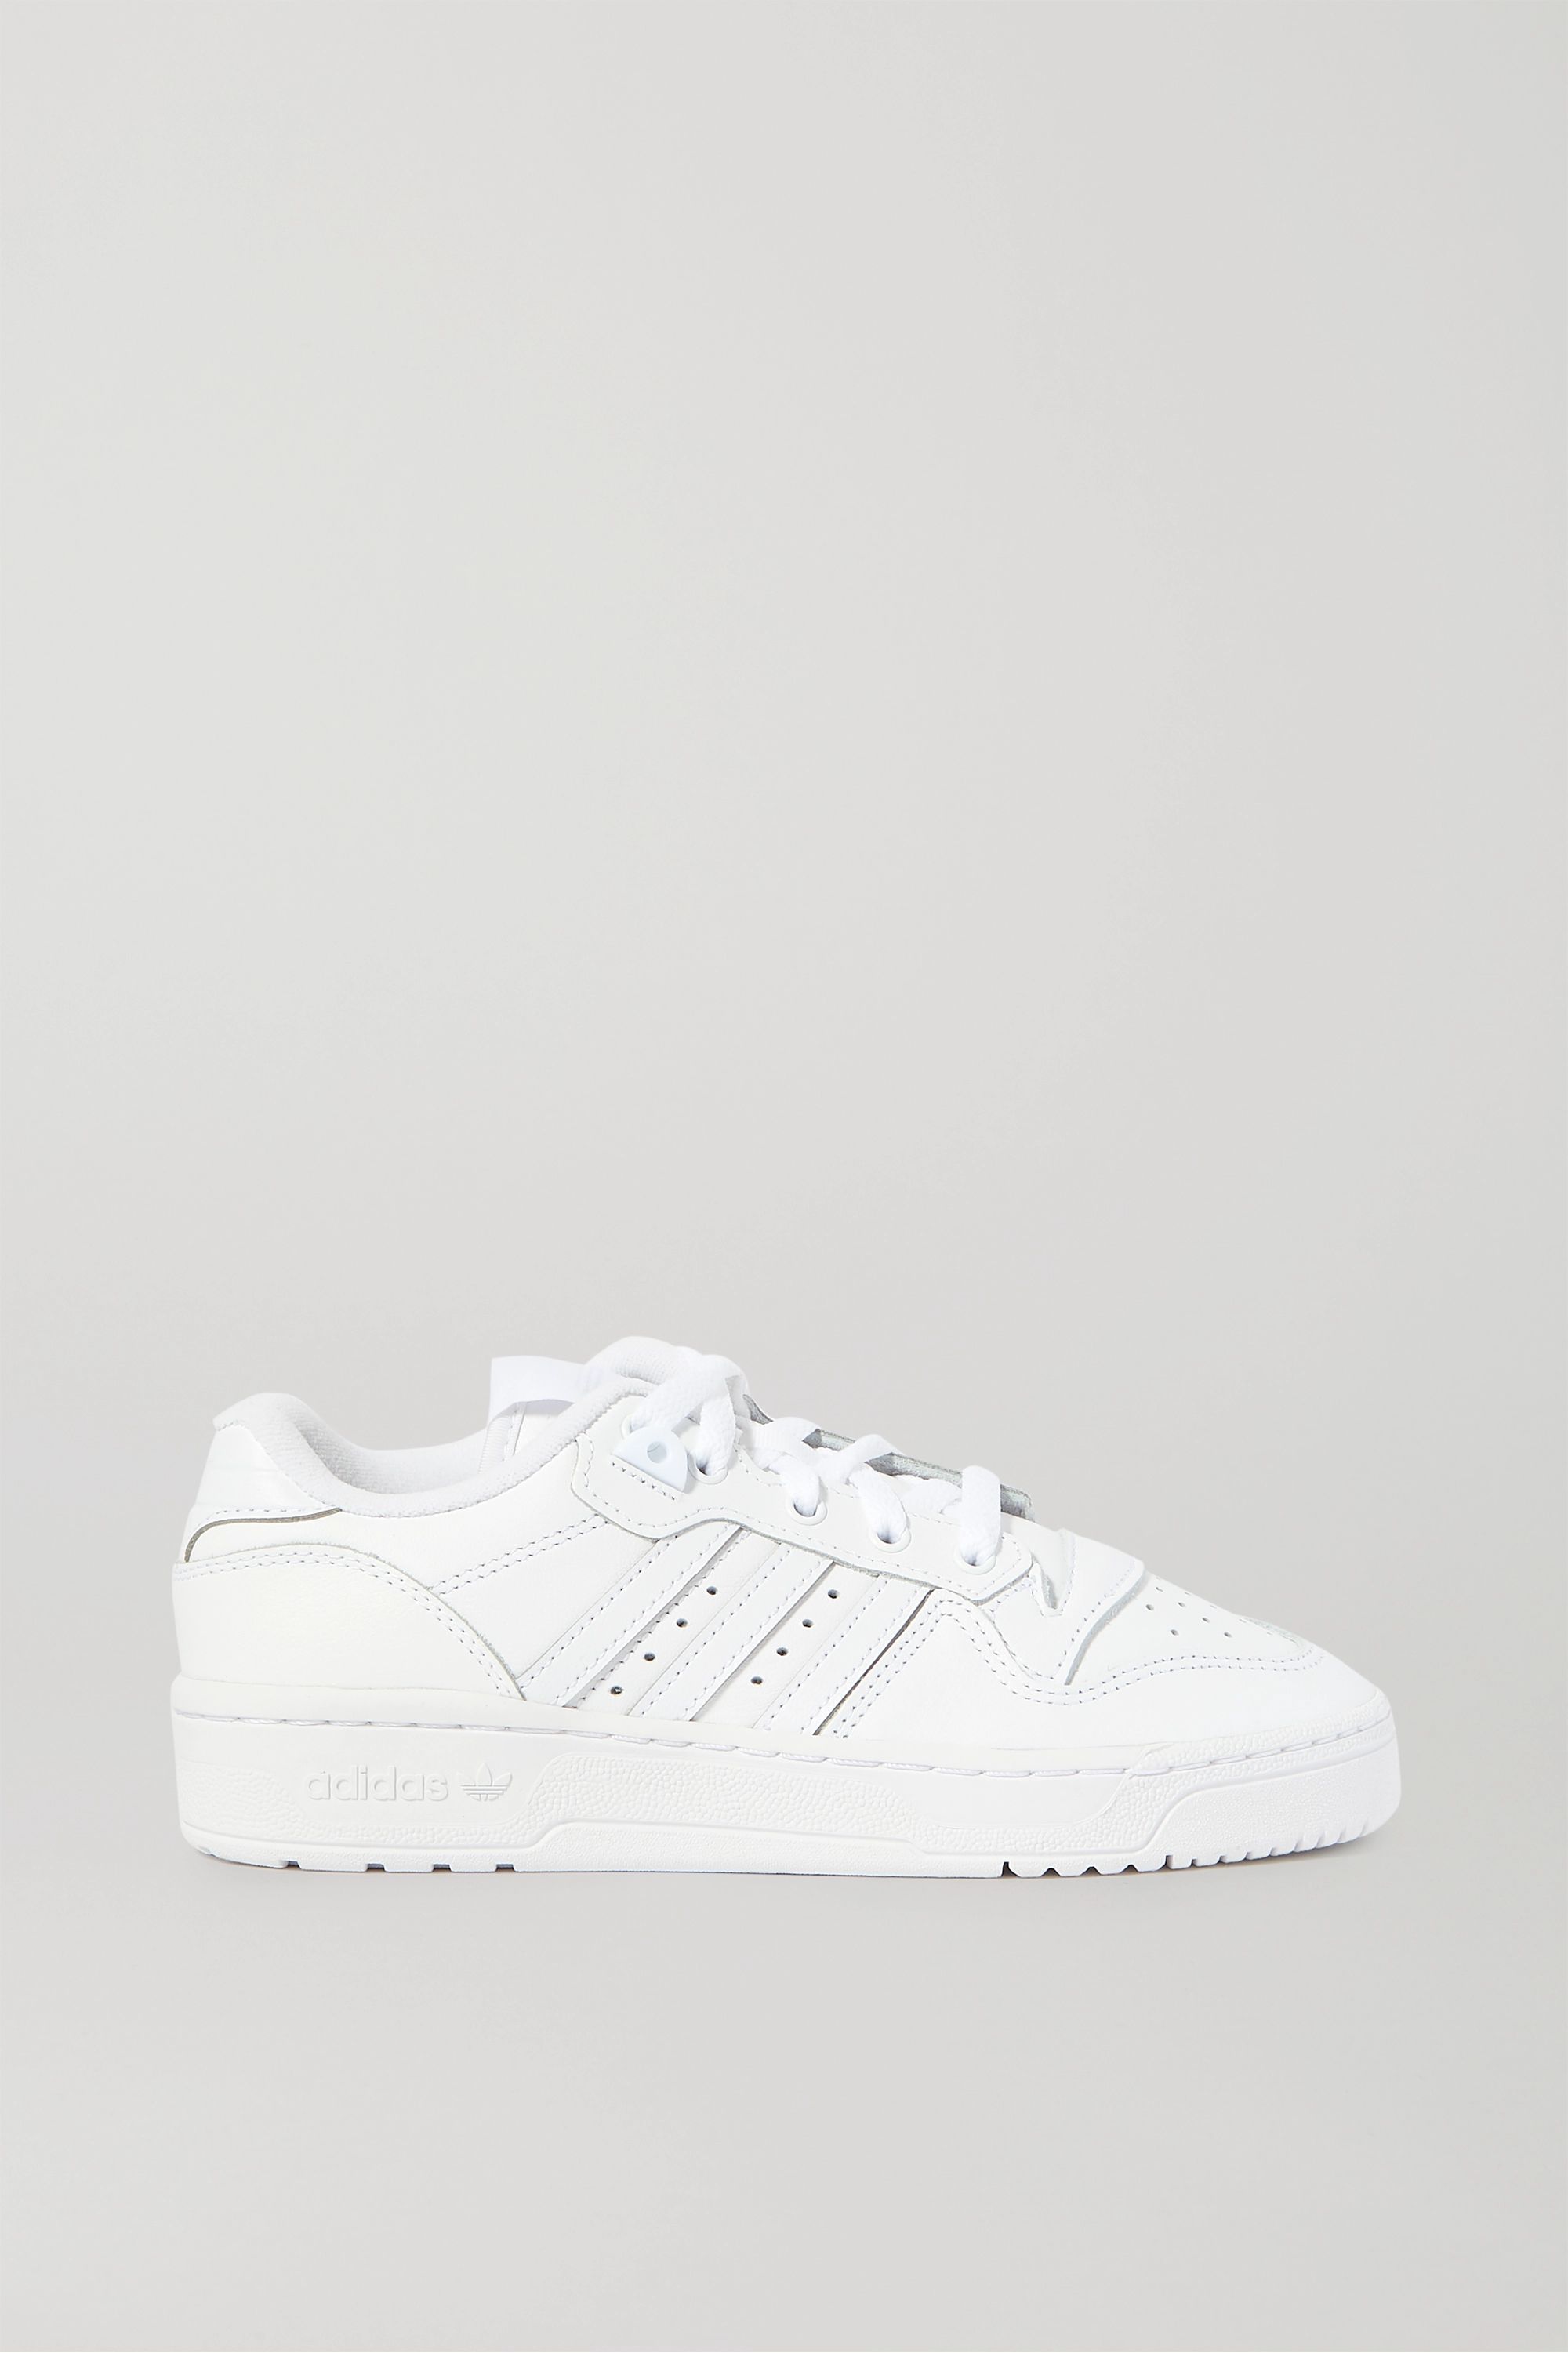 Classic White Trainers You Need In Your 